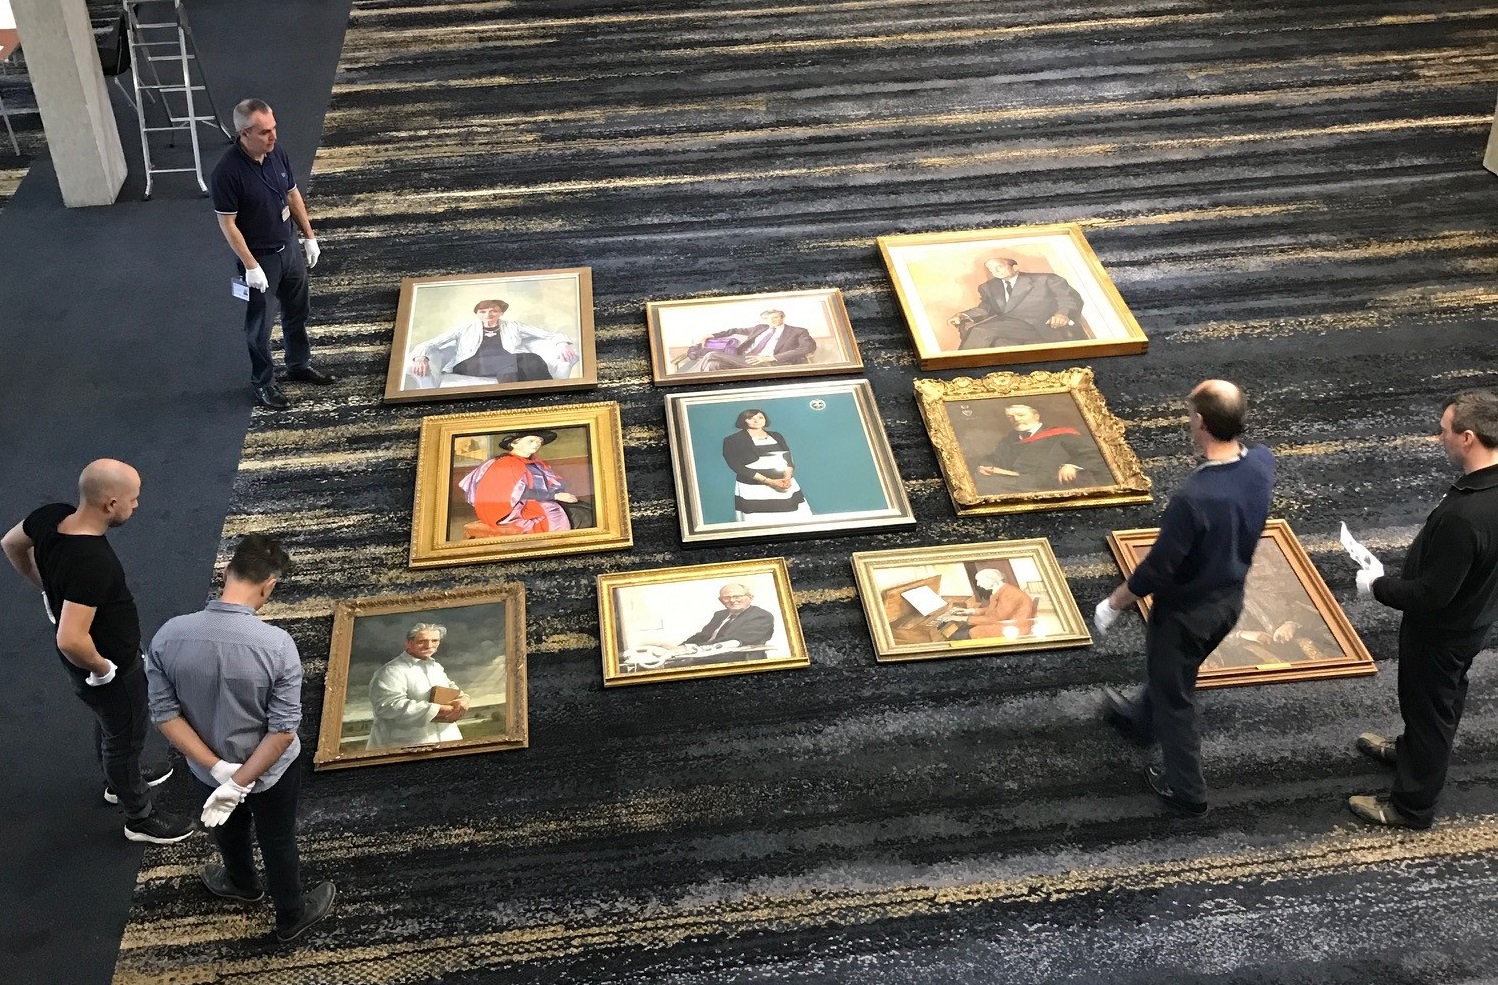 Bird's eye view: arranging the portraits to get the final measurements and spacing